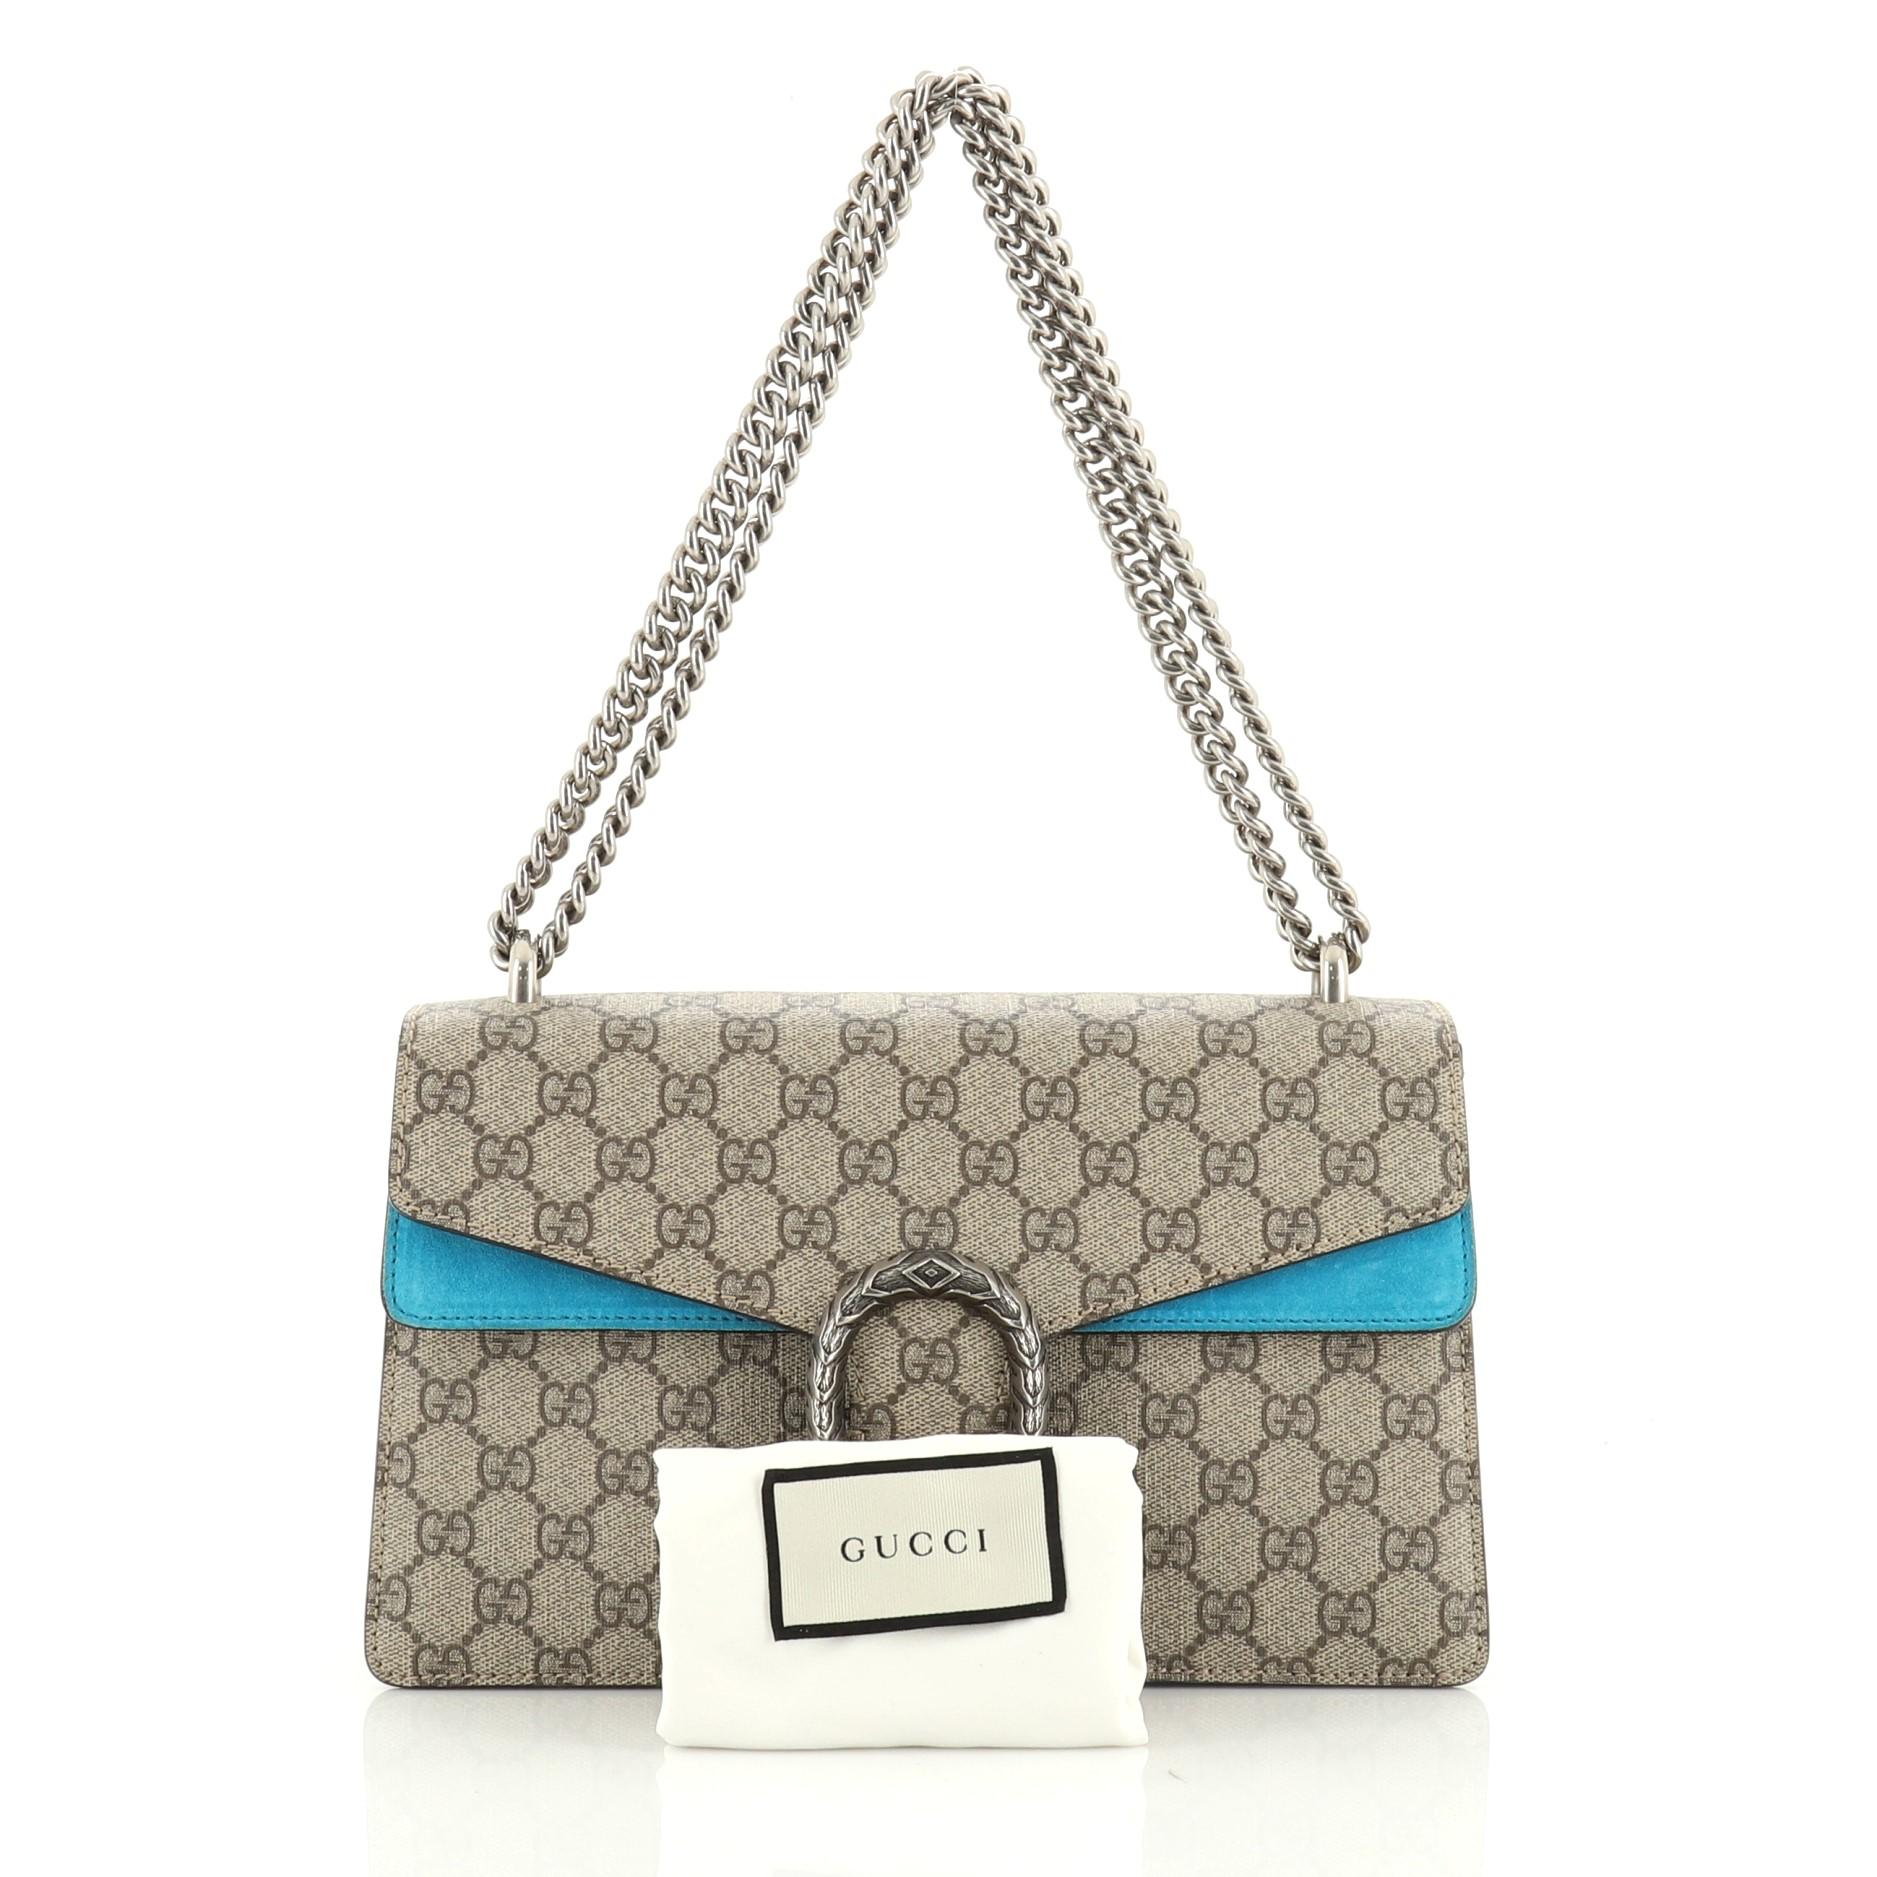 This Gucci Dionysus Bag GG Coated Canvas Small, crafted from brown GG coated canvas, features a sliding chain strap, tiger head spur detail on flap, and aged silver-tone hardware. Its pin closure opens to a blue suede interior with two open